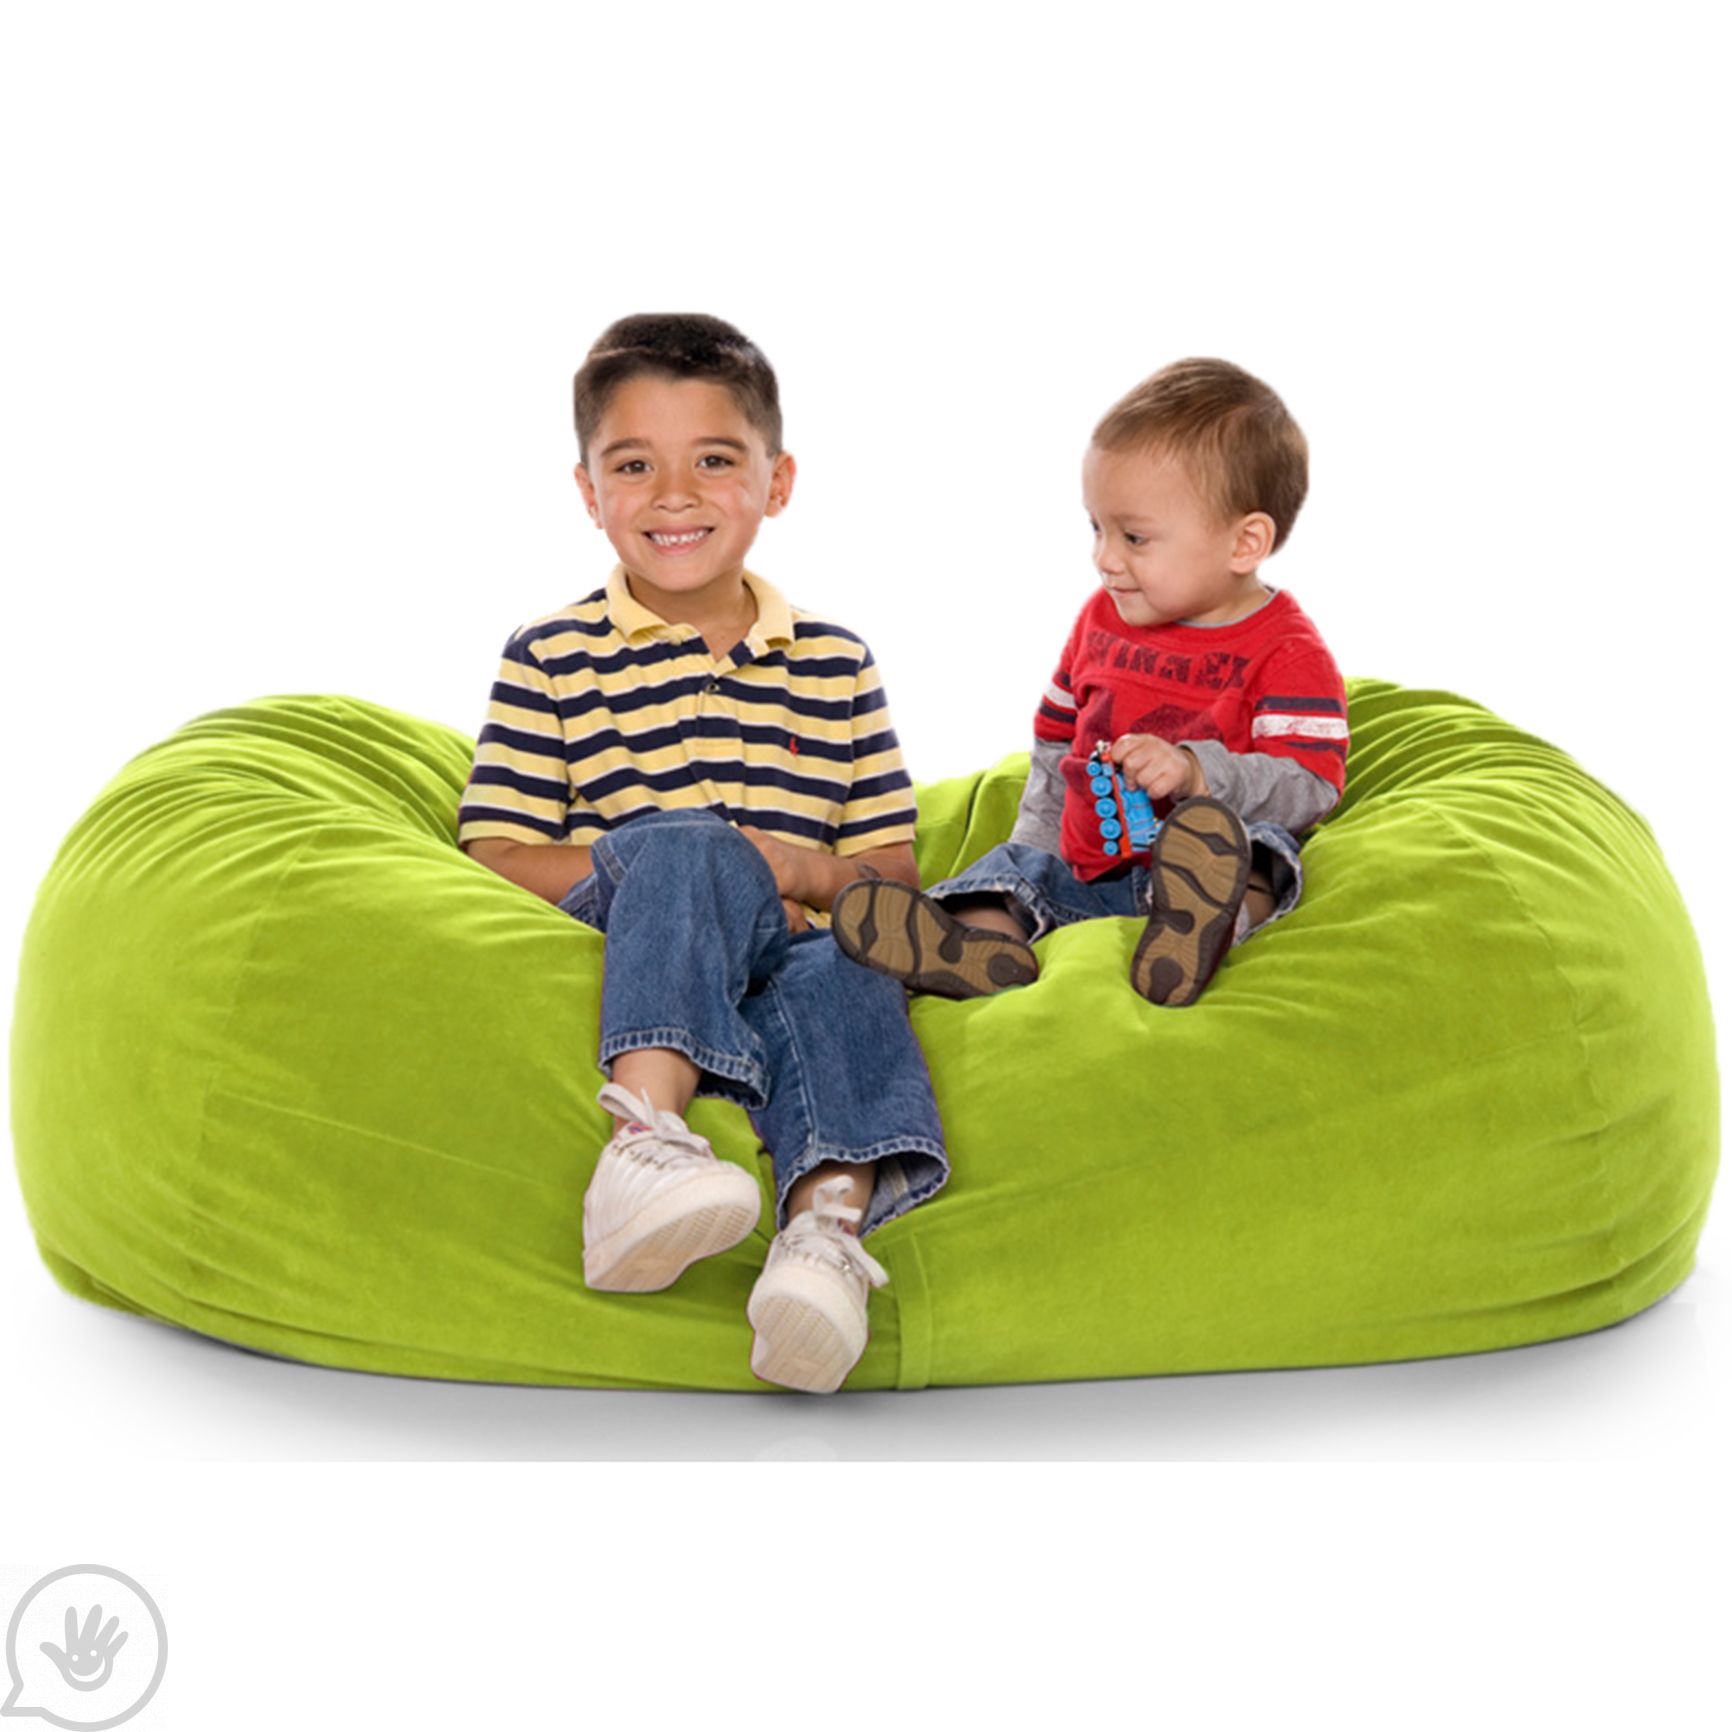 Amazon.com: Sofa Sack - Plush Ultra Soft Bean Bags Chairs for Kids, Teens,  Adults - Memory Foam Beanless Bag Chair with Microsuede Cover - Foam Filled  Furniture for Dorm Room - Charcoal